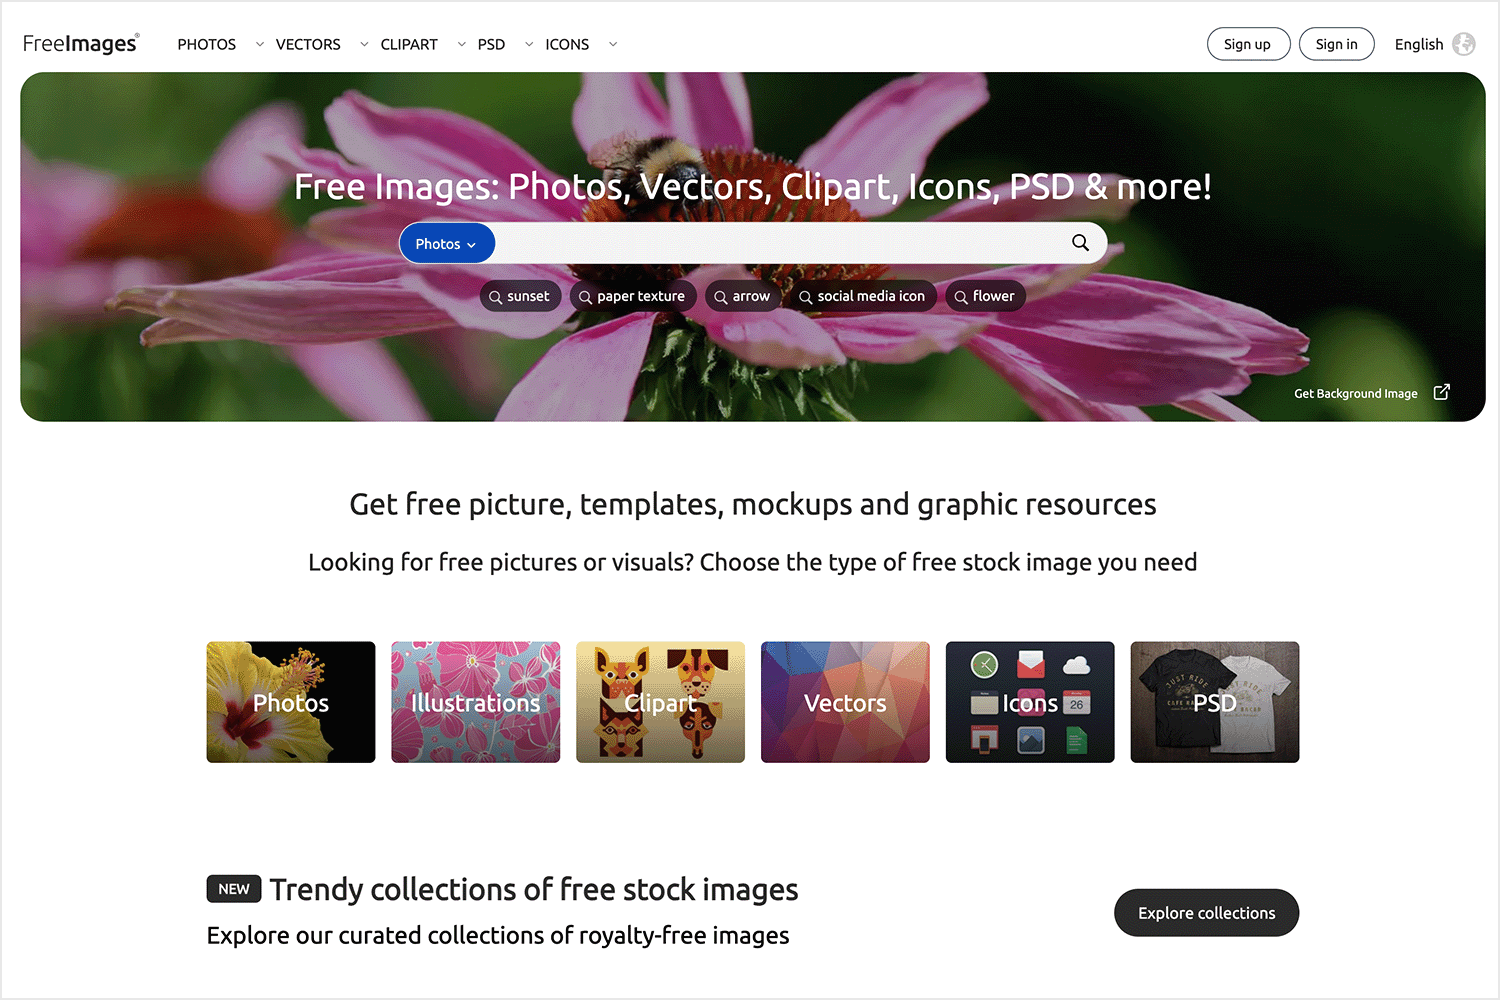 FreeImages homepage showcasing free vectors